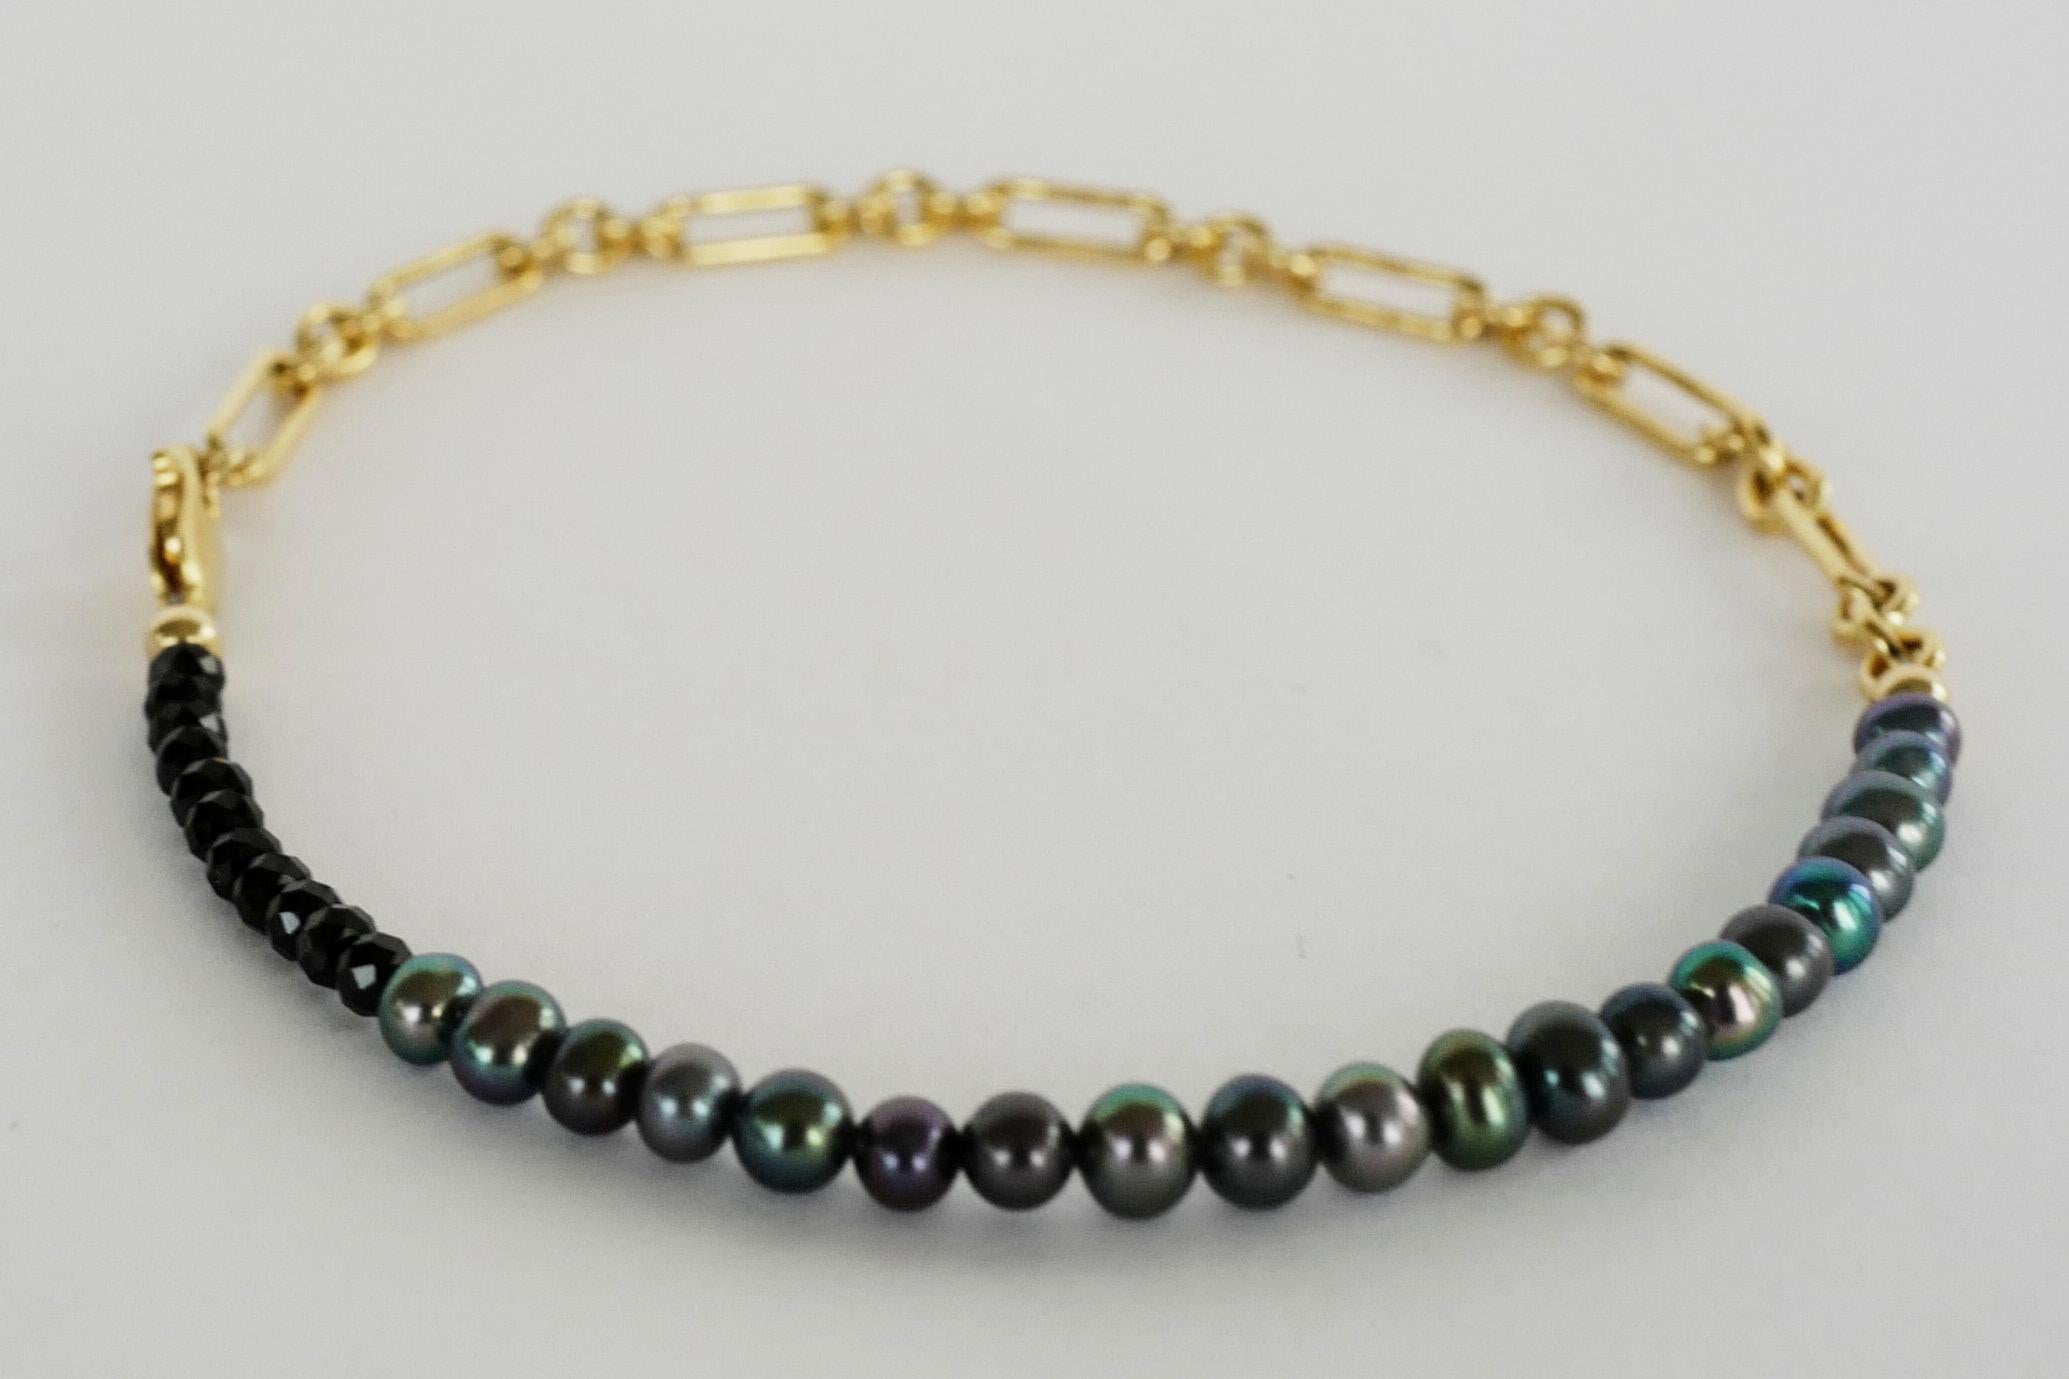 Black Pearl Beaded Choker Necklace Black Spinel Gold Filled Chain J Dauphin For Sale 1